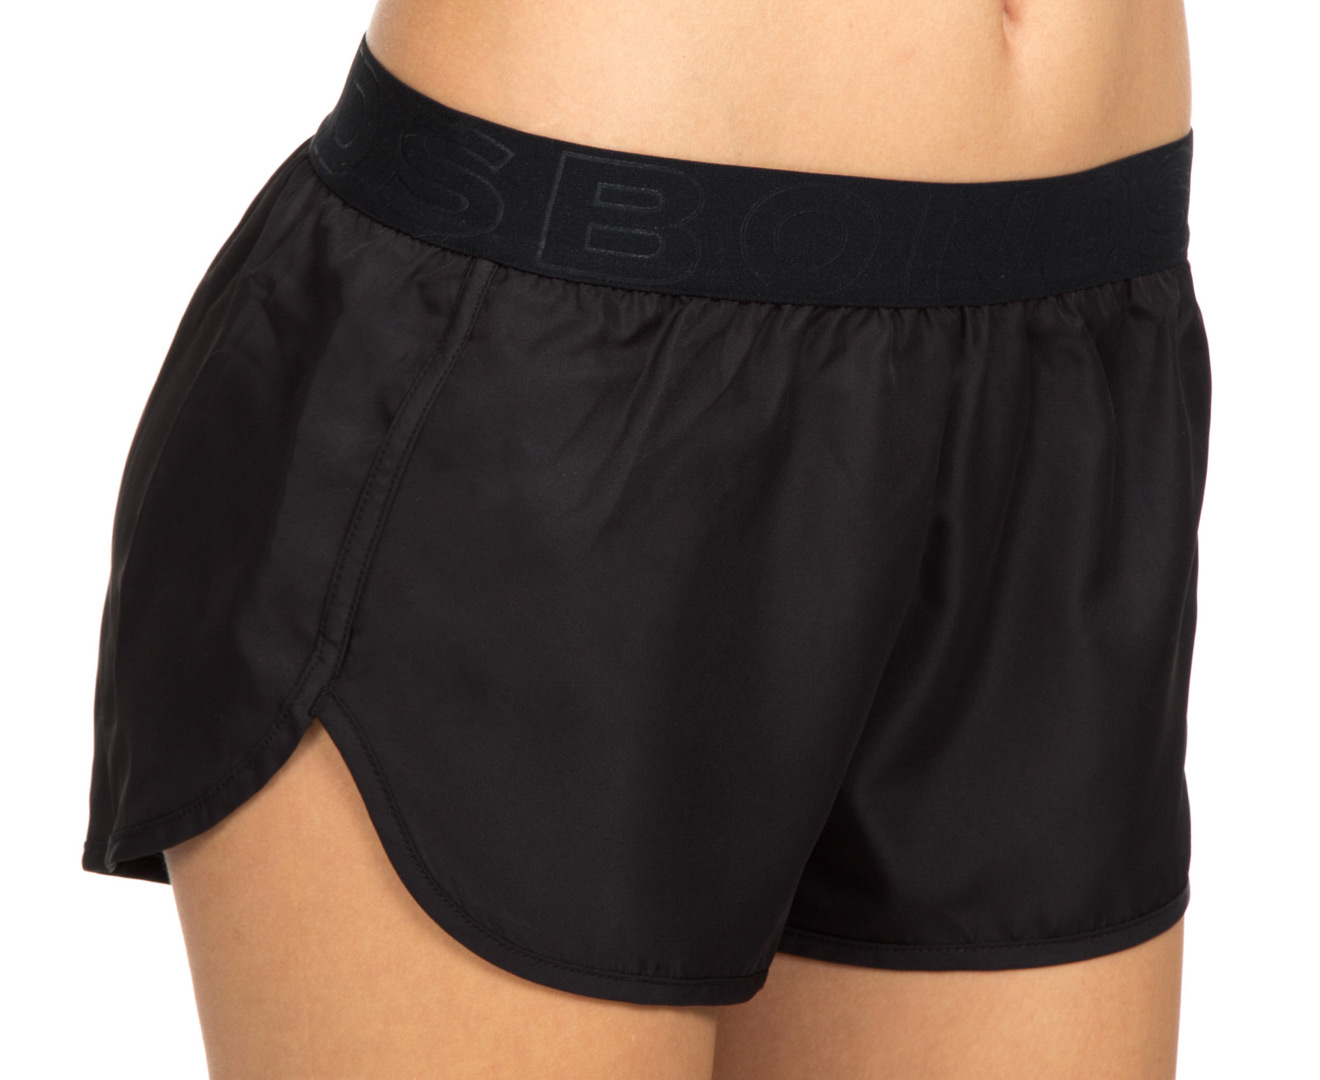 Bonds Women S Running Shorts Black Great Daily Deals At Australia S Favourite Superstore